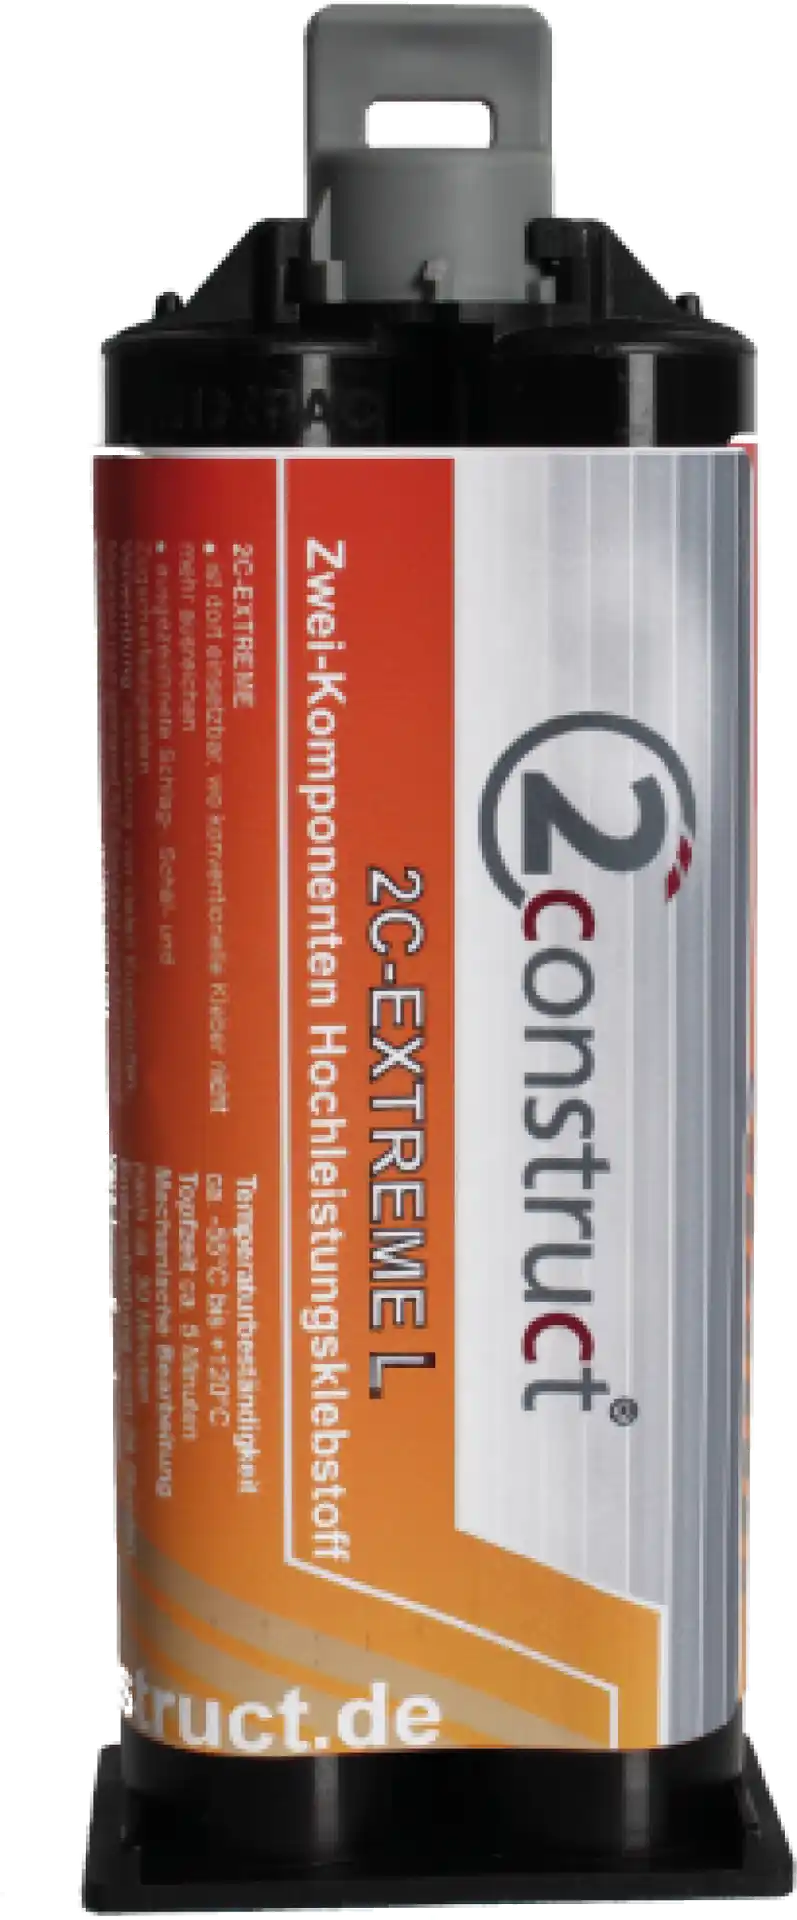 2Construct® EXTREME